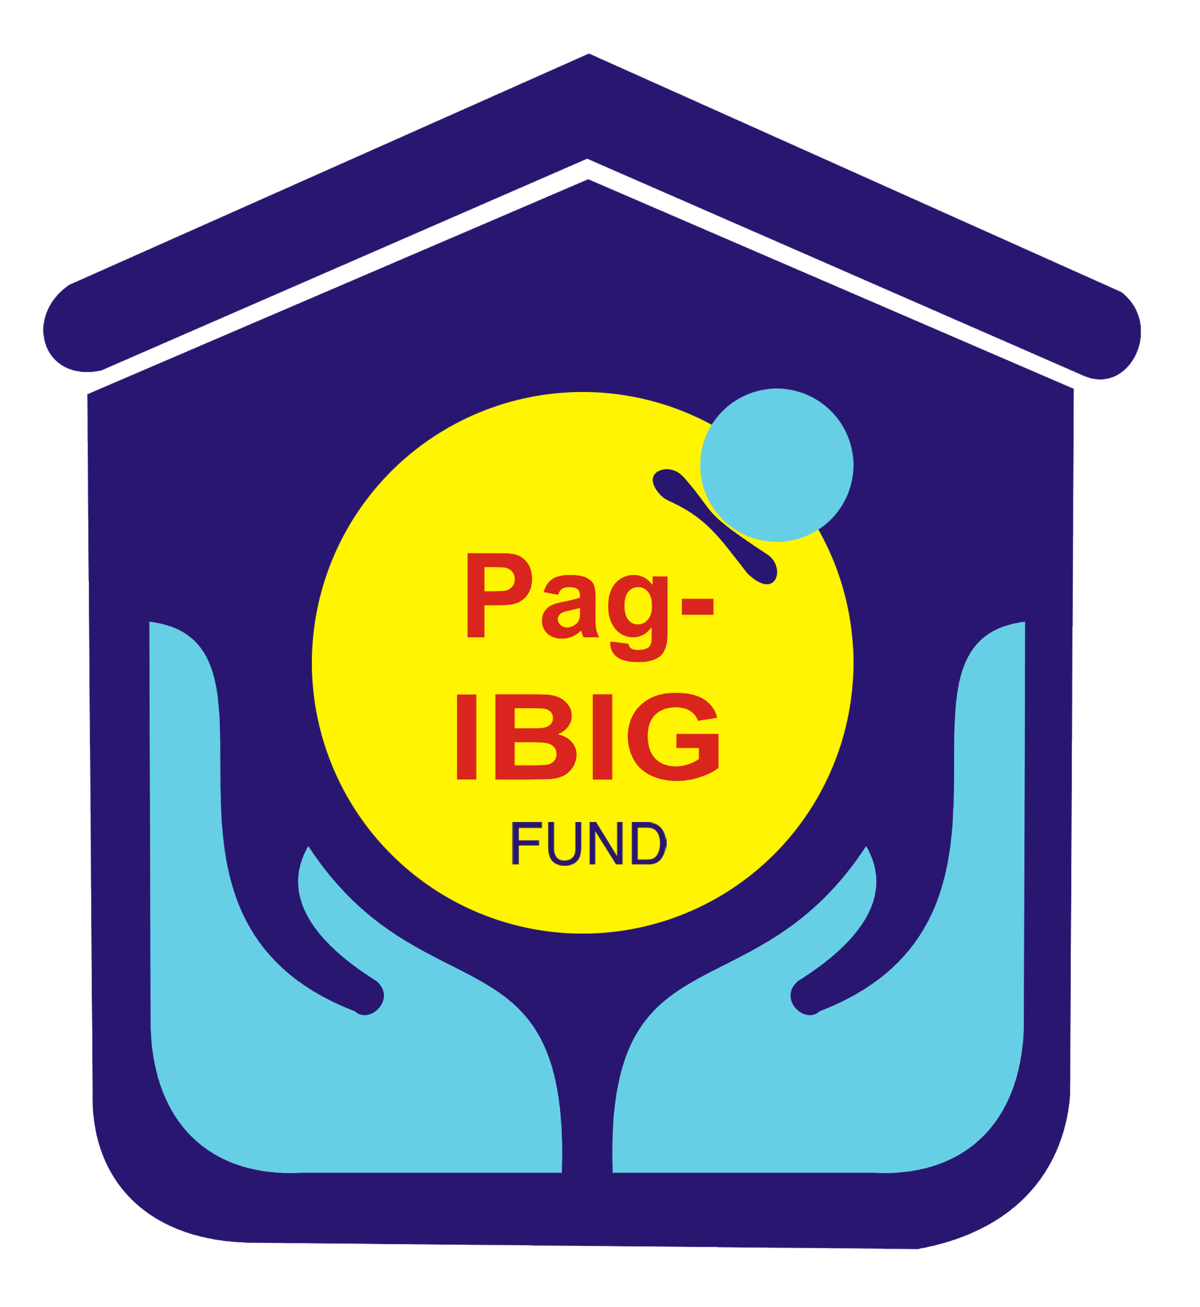 Pag-Ibig Calamity Loan ready for members affected by Typhoon Carina